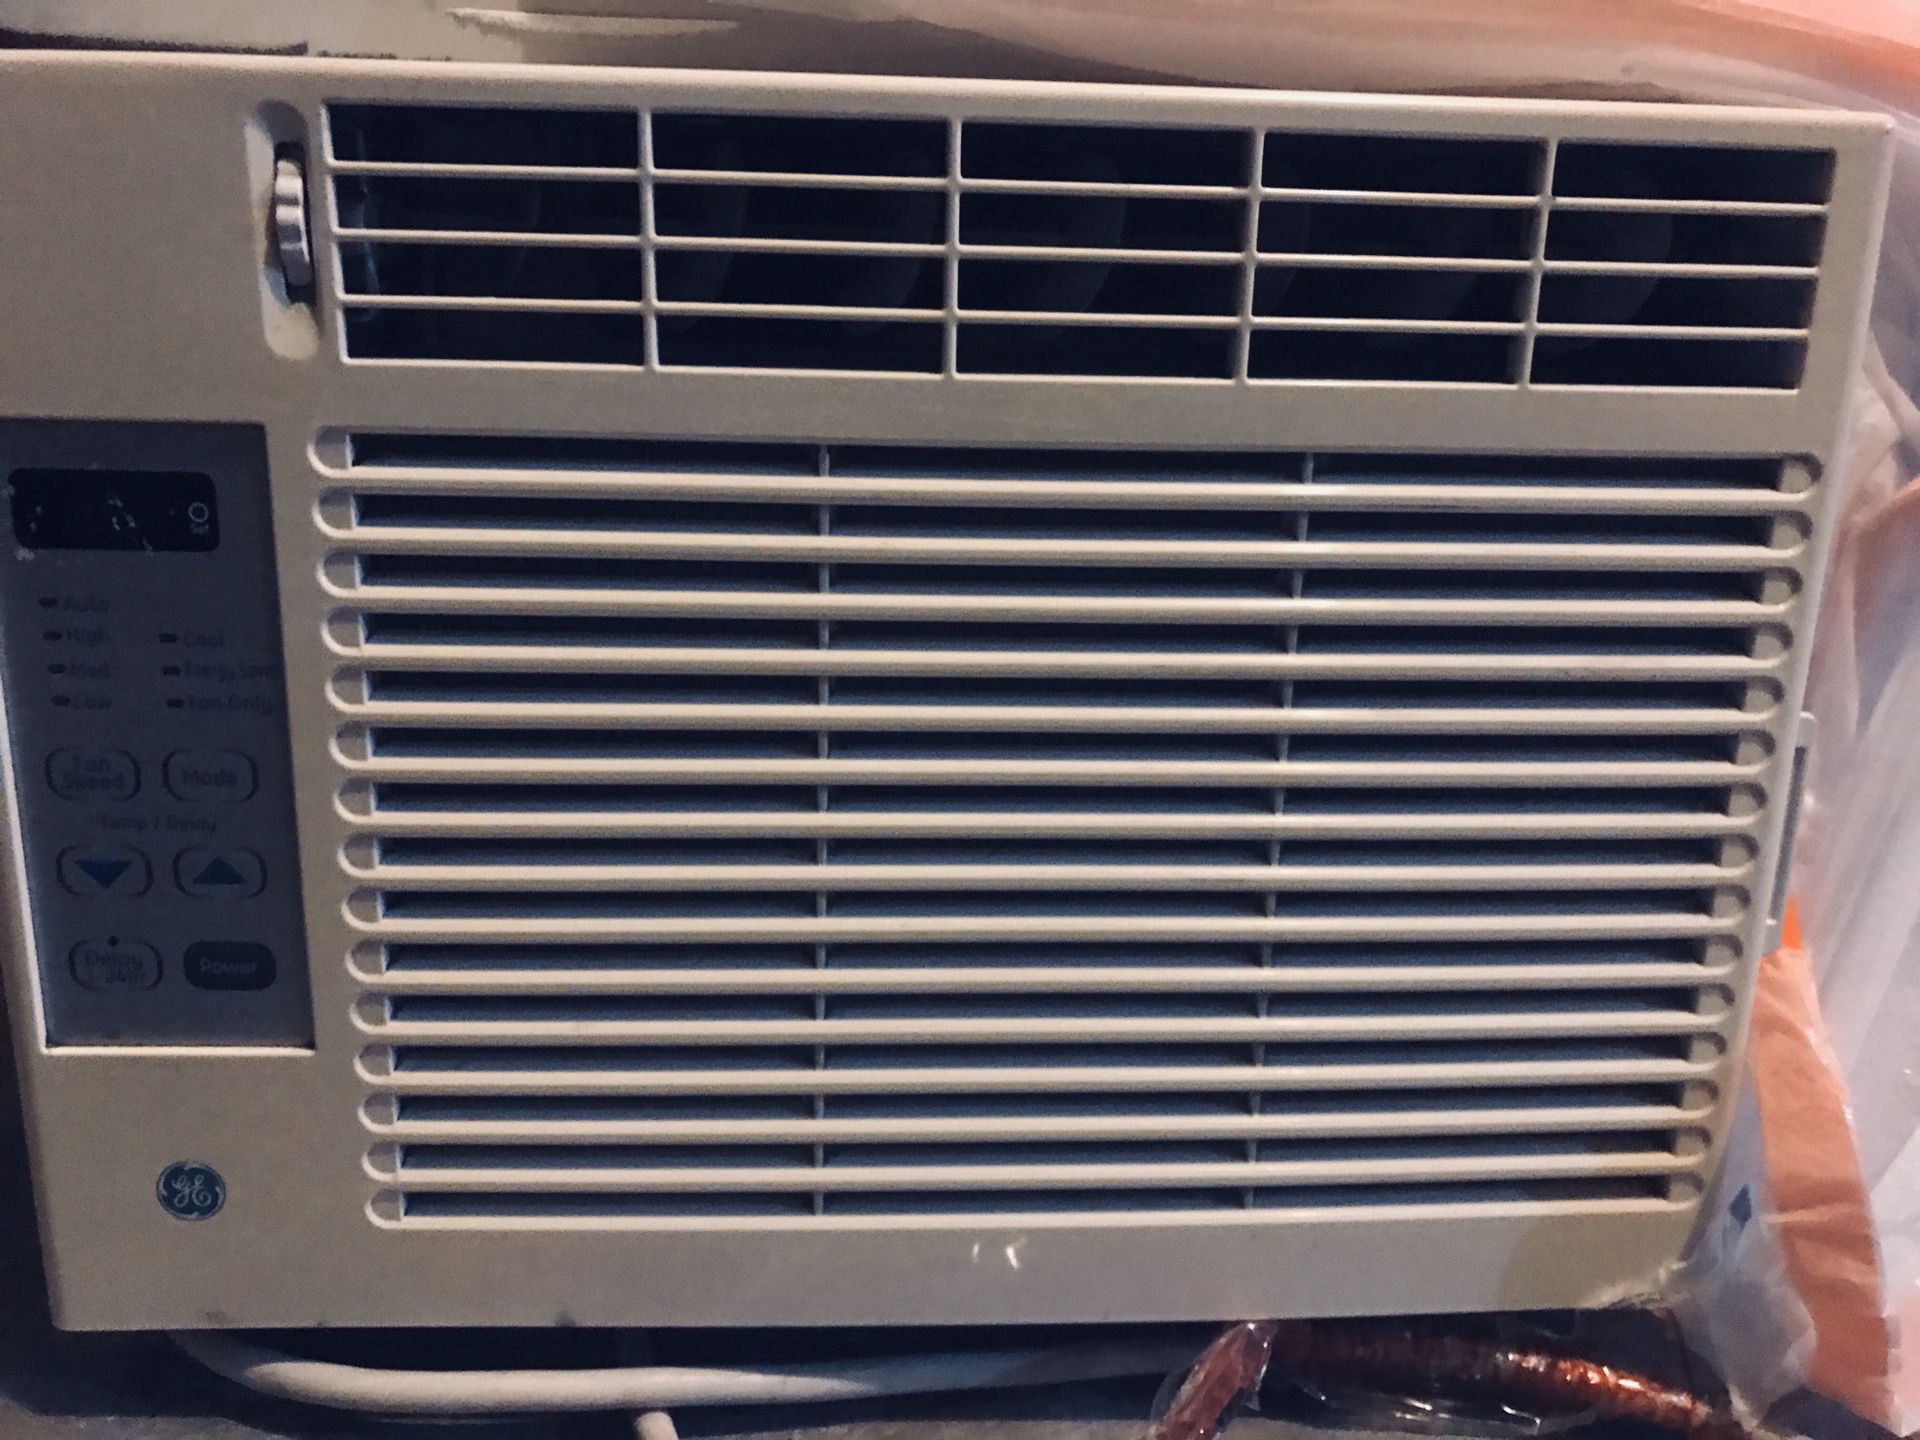 Window ac unit small but strong. Works very well